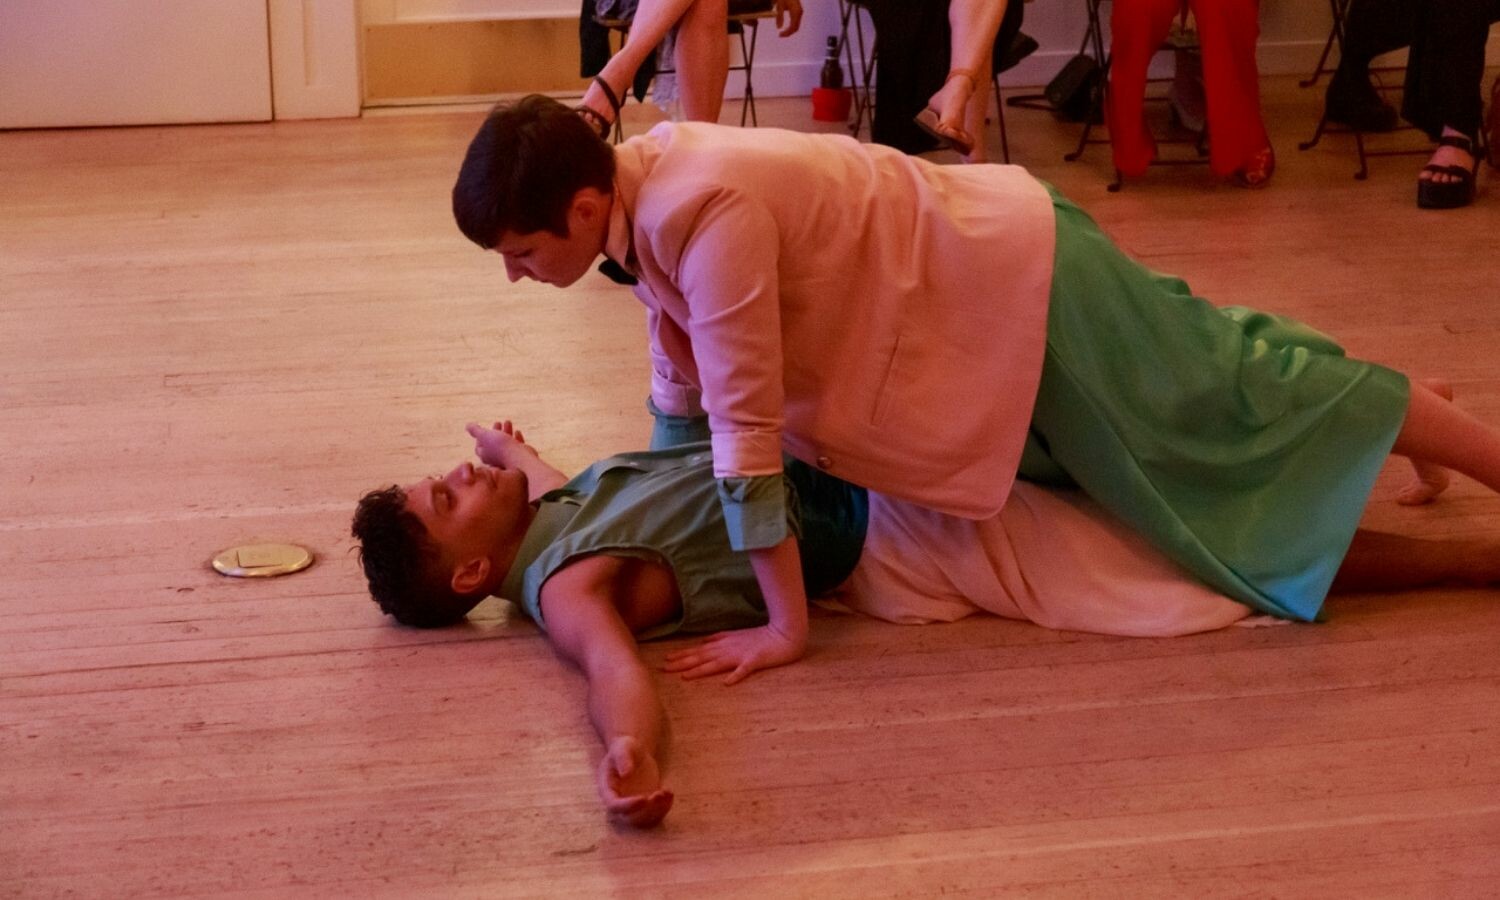 One actor with both arms around the other actor, pinning them to the ground. The actor on the floor with both arms straightened out.